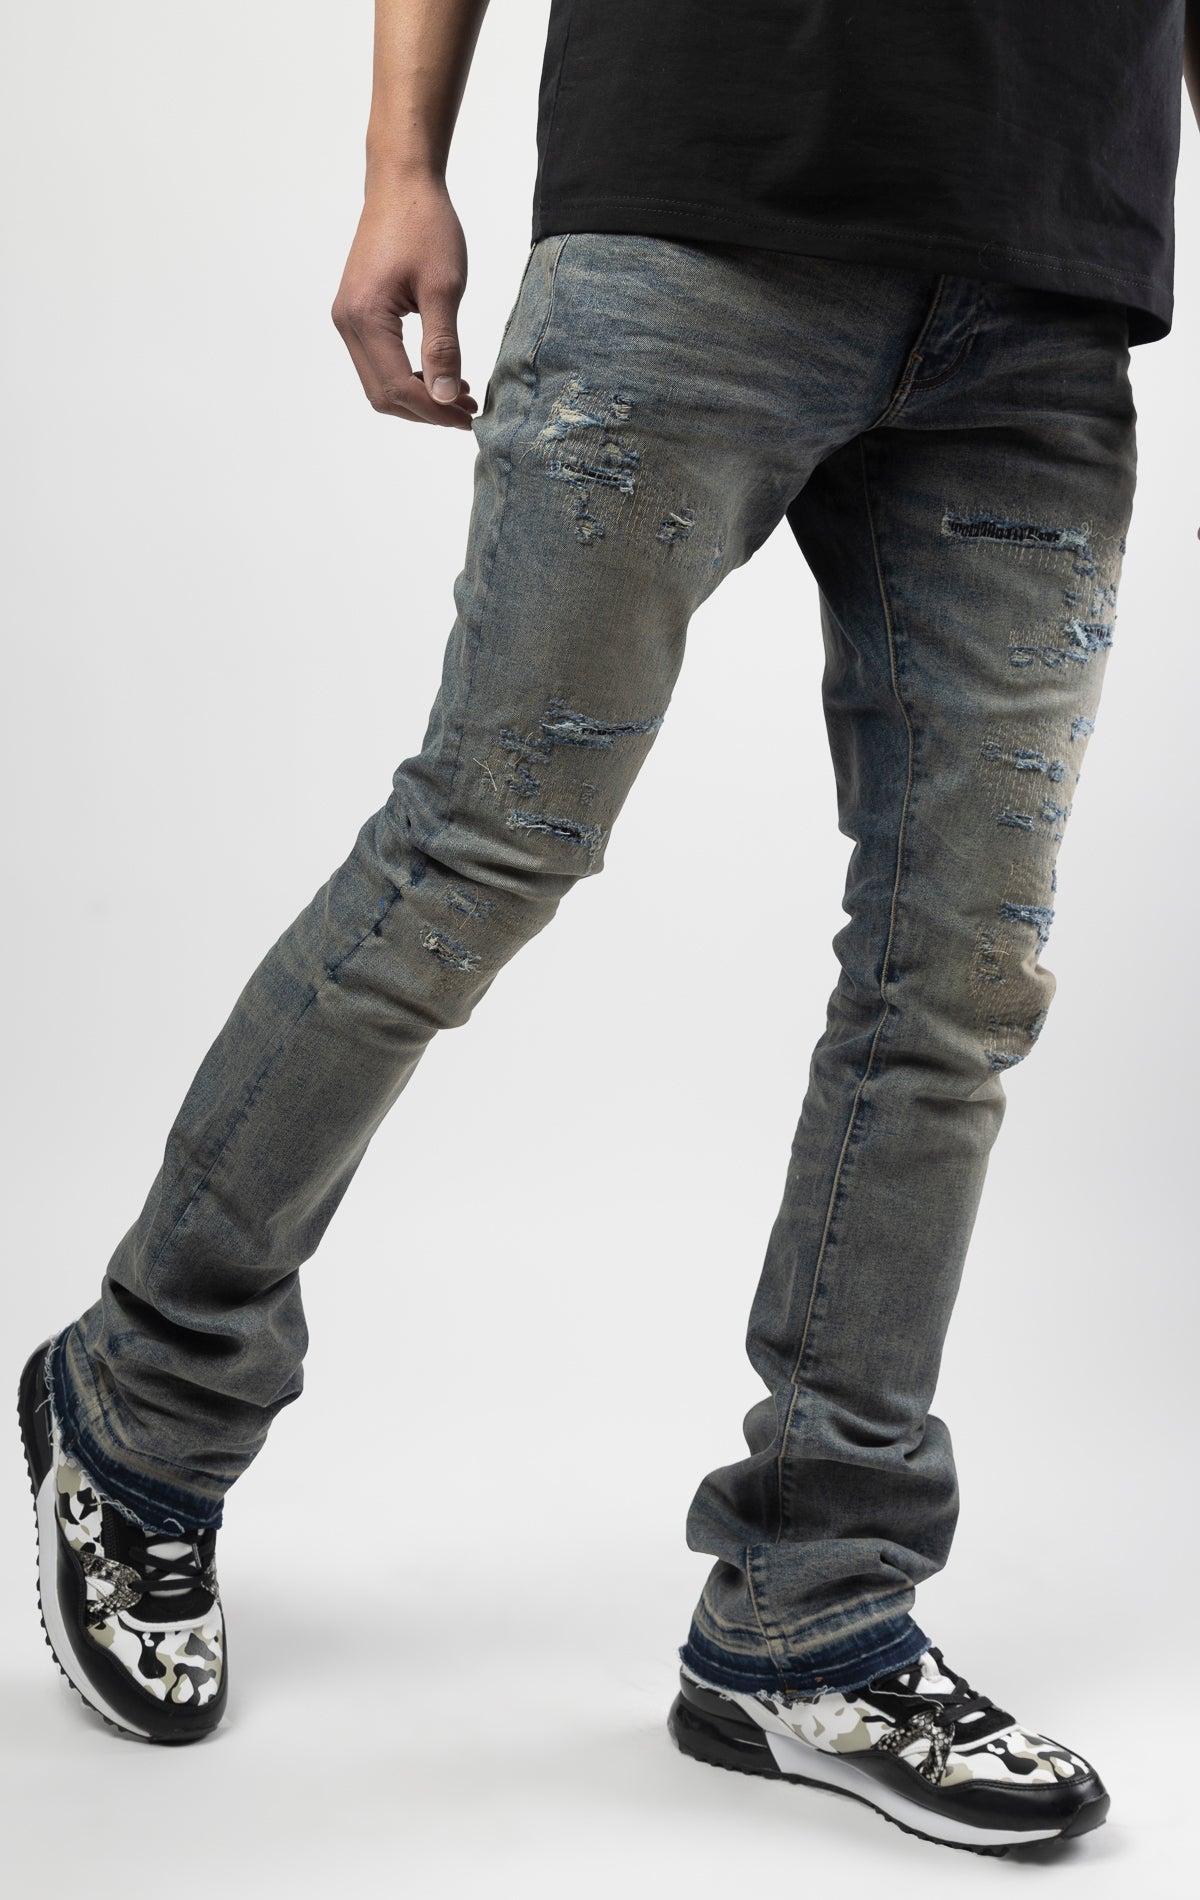 Death valley jeans with 3D wrinkles, rip and repair design